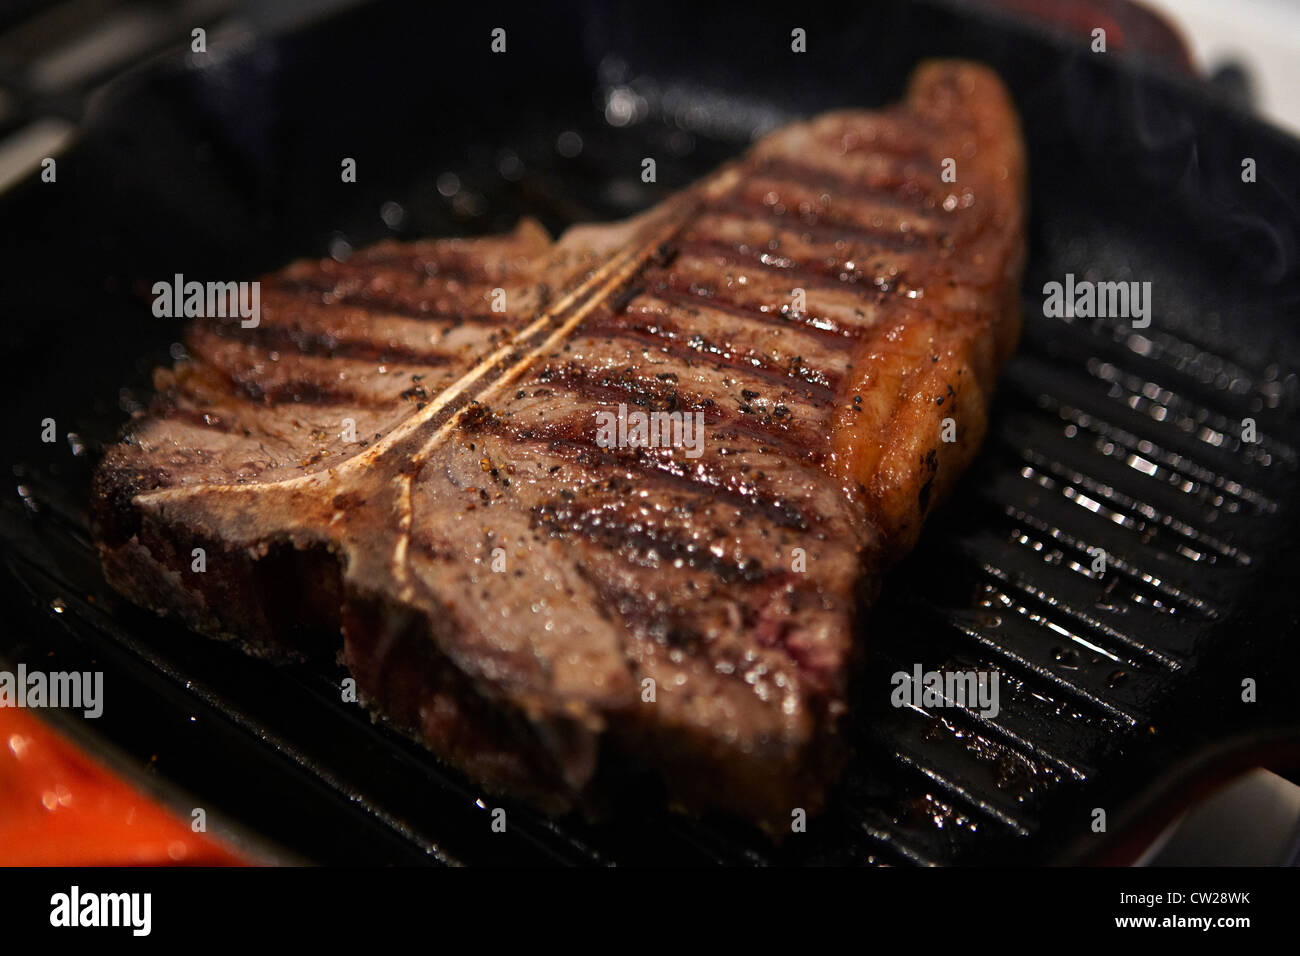 T-bone steak in frying pan getting cooked Stock Photo - Alamy